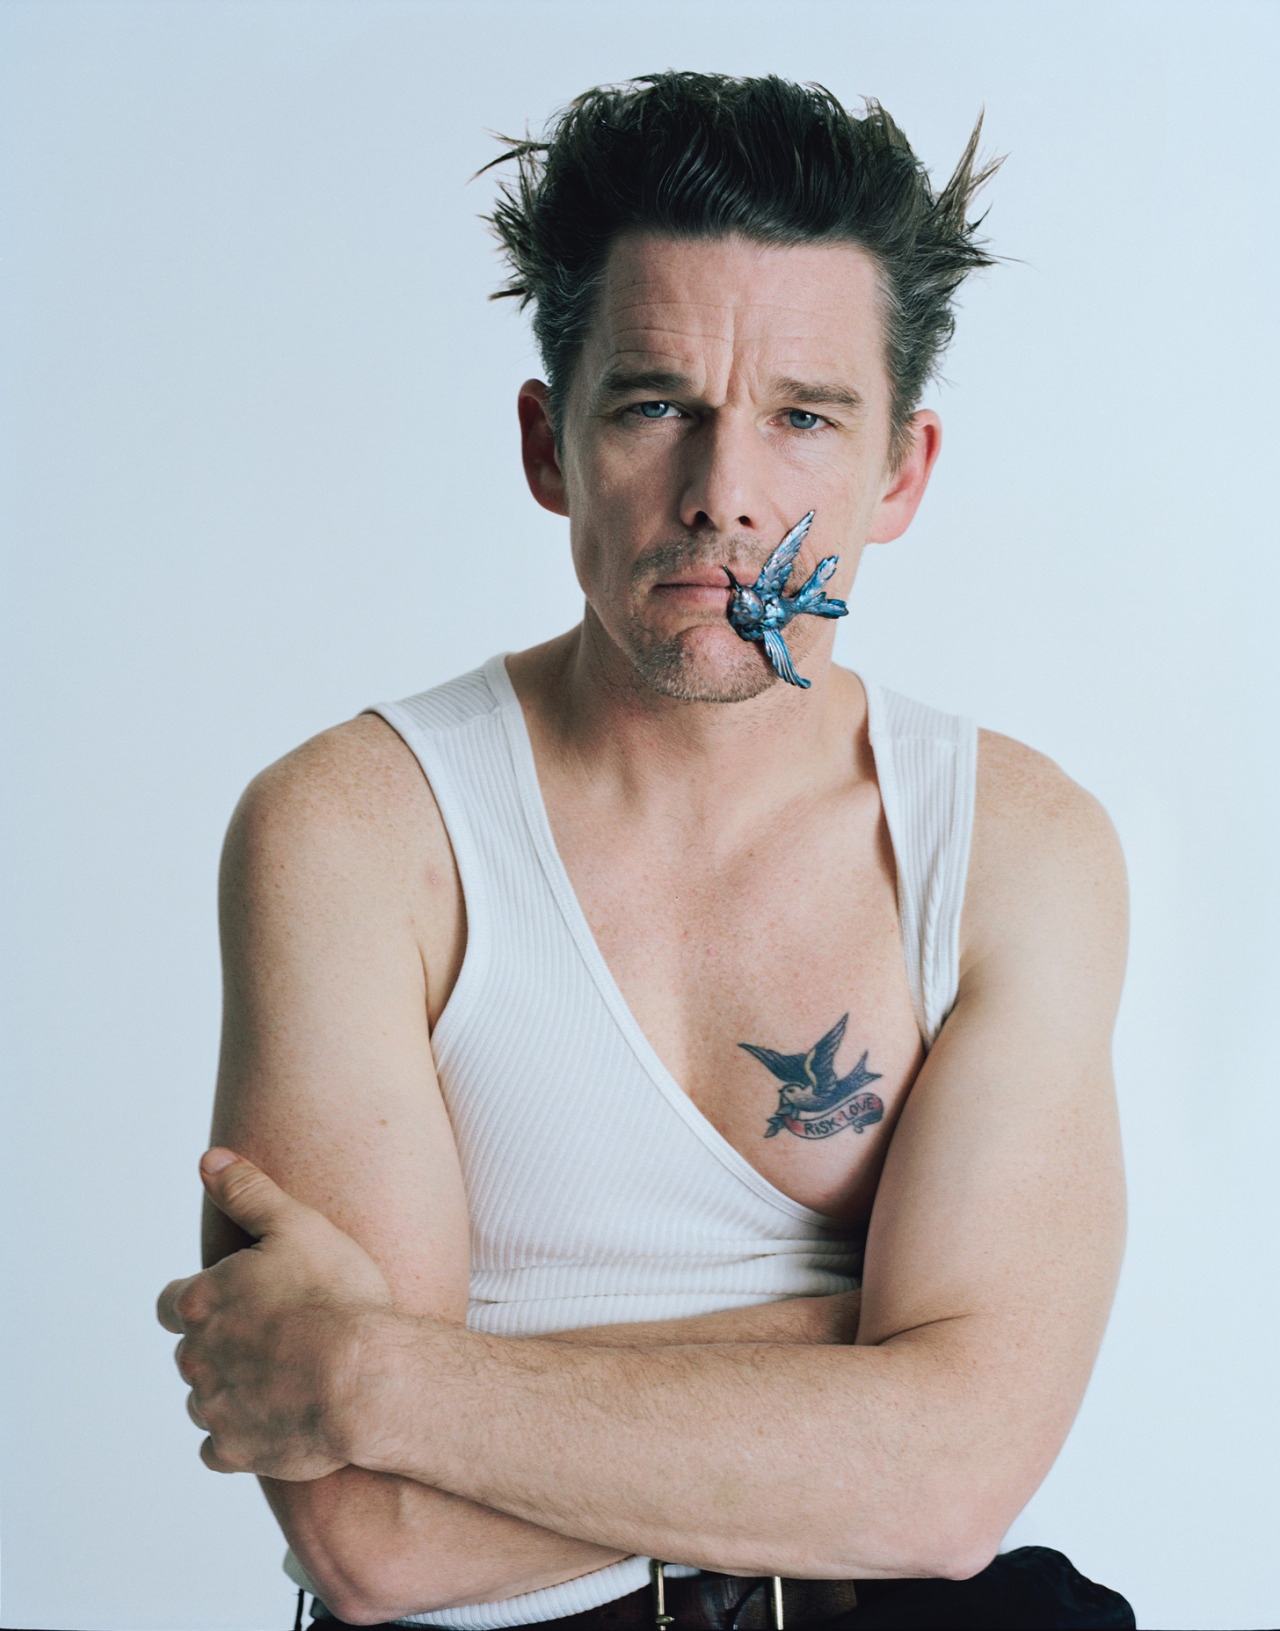 Growing Up with Ethan Hawke
Photograph by Tim Walker; styled by Jacob K; W magazine February 2014. 